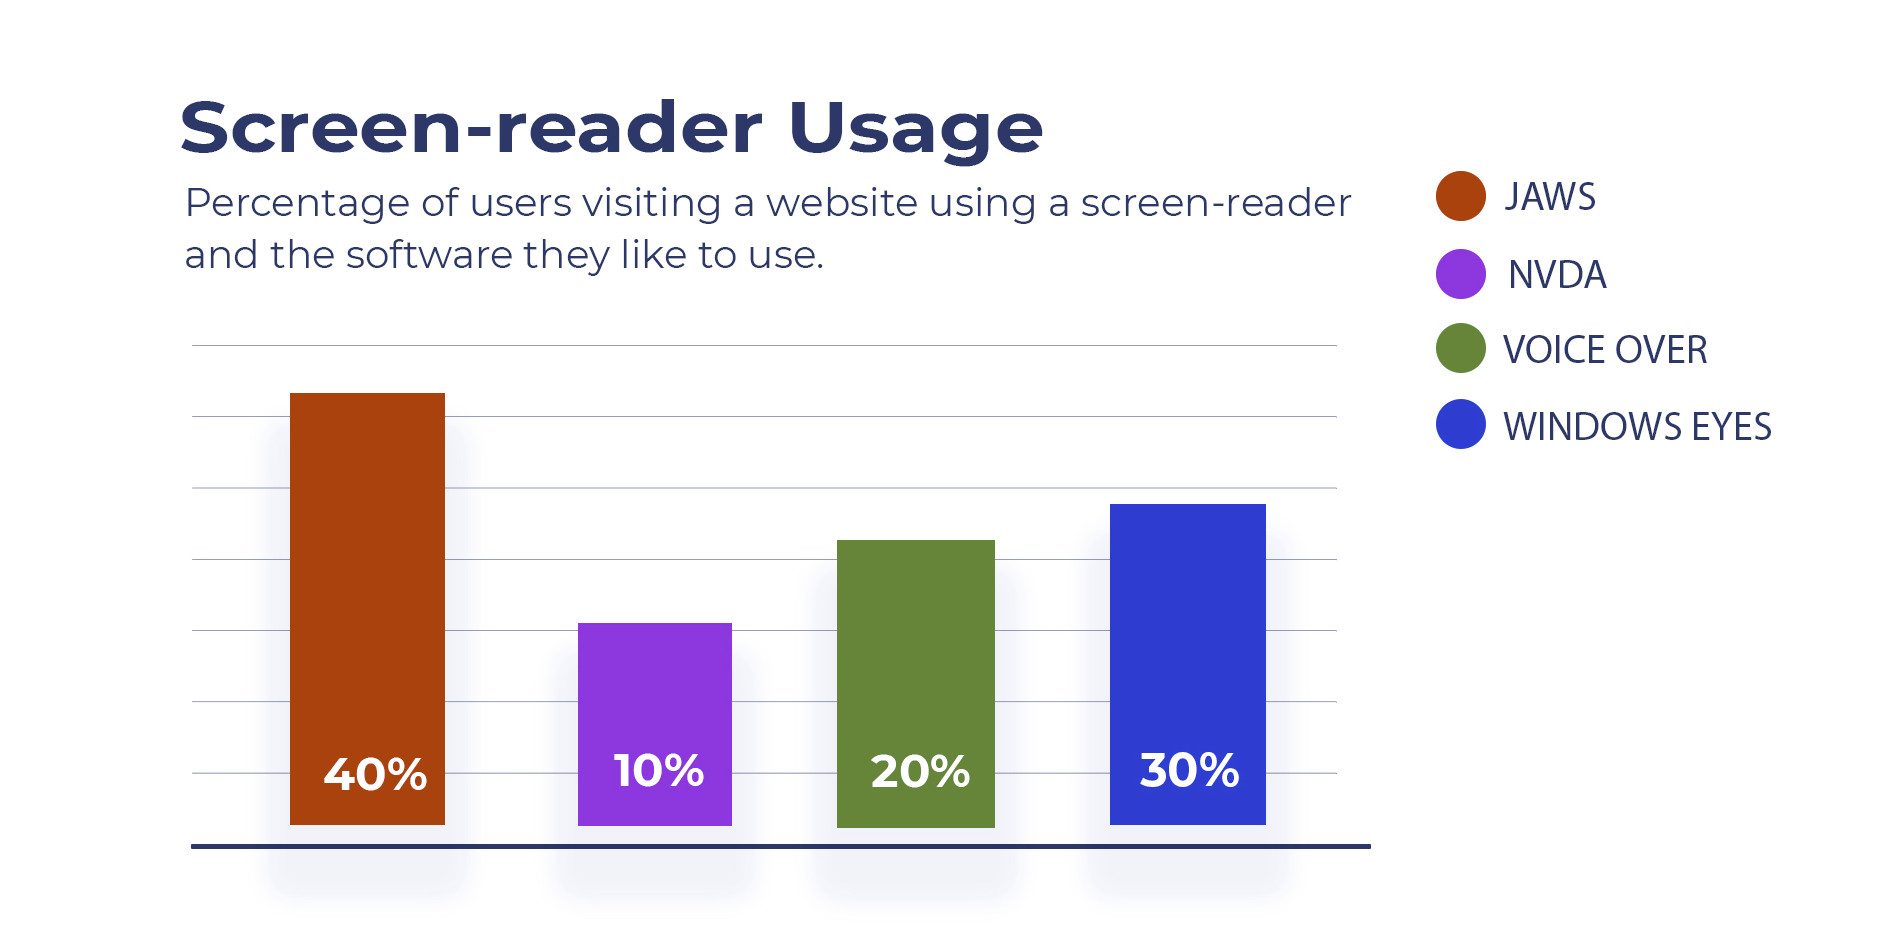 Figure 6 – Red Weak. An example of a bar chart graphic affected by a Red Weak color deficiency, the design relies on color to convey meaning. The colors in the graphic are being affected by a red weak color deficiency. The colors look different from the original design. The graphic reads - Percentage of users visiting a website using a screen-reader and the software they like to use. 40% JAWS, 10% NVDA, 20% Voice Over, 30% Windows Eyes.